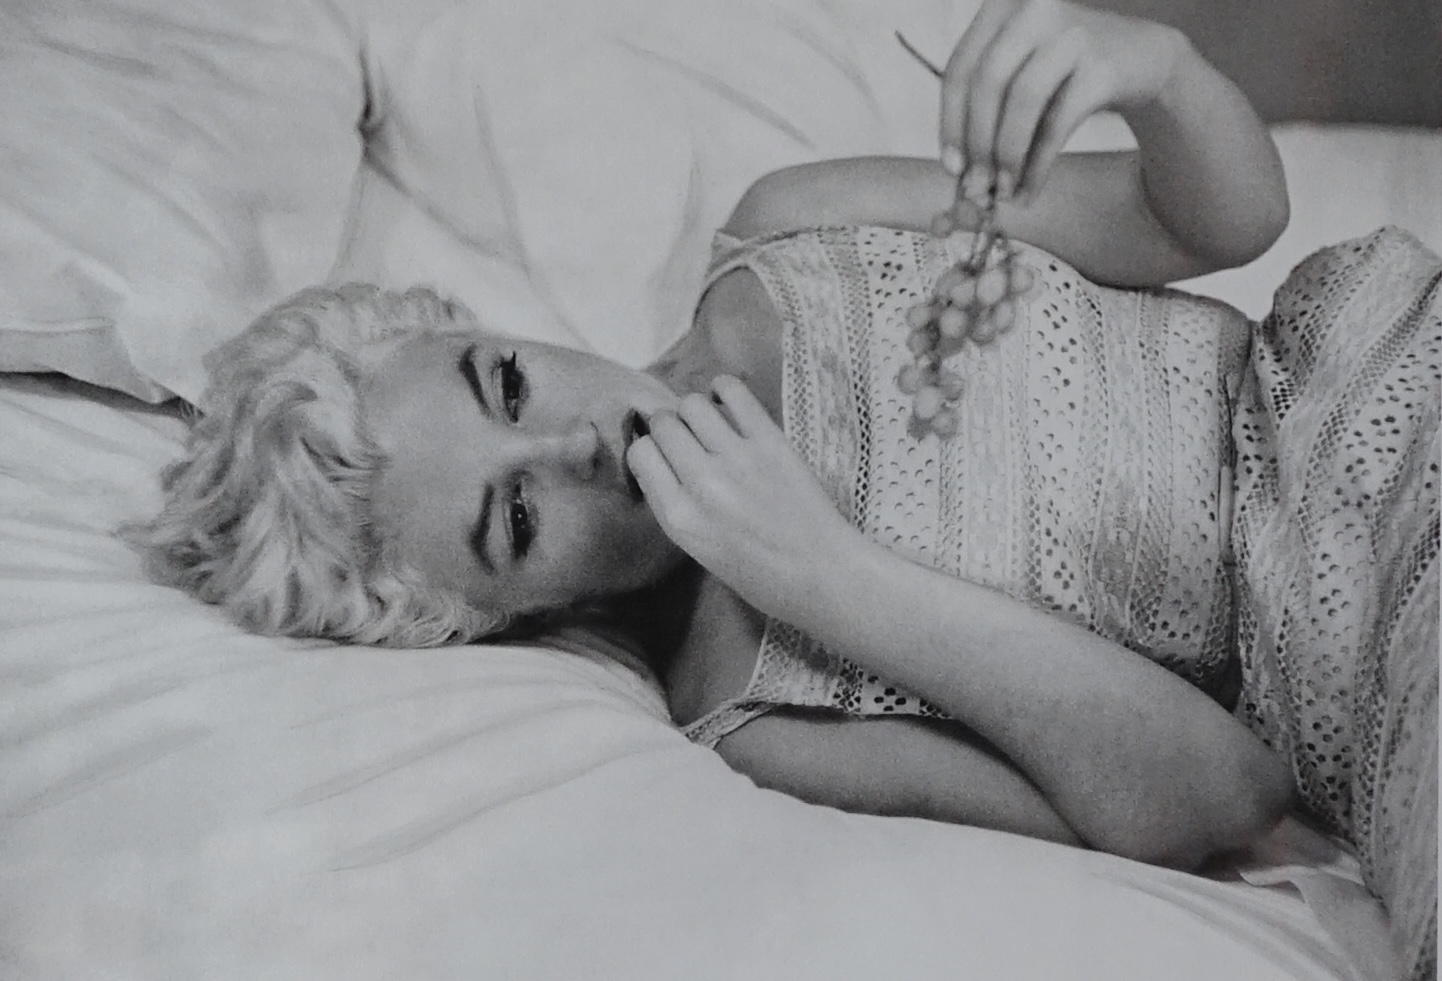 After Eve Arnold (1912-2012), limited edition re-printed photograph, Marilyn Monroe, pencil numbered 296/495, 49cm x 35cm. Condition - good